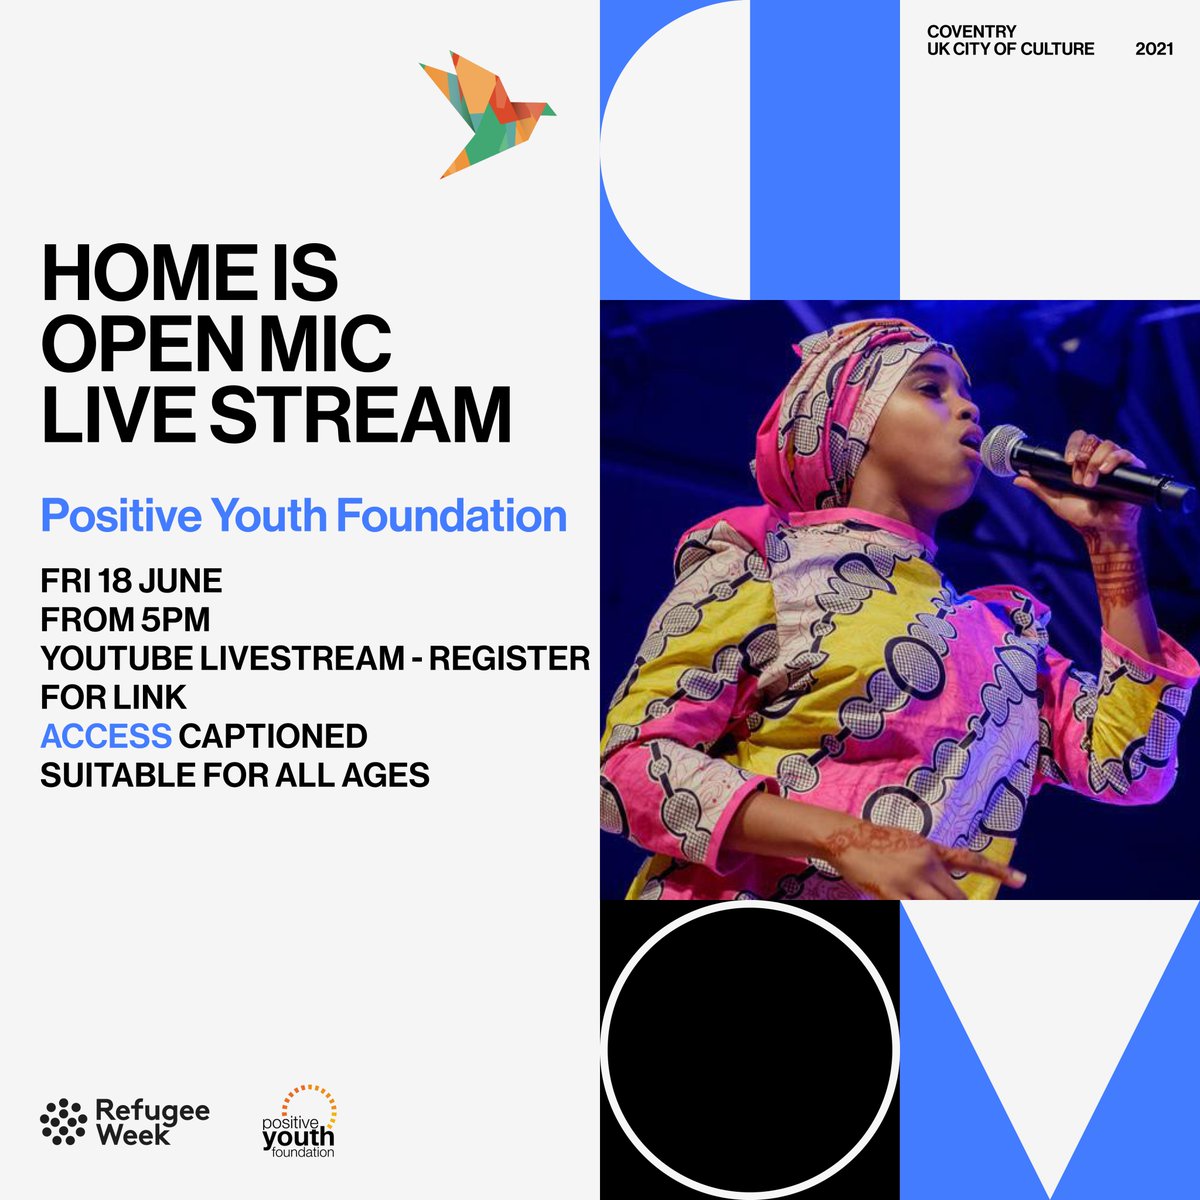 Join @positiveyouth96 for an open mic life stream. to find out more visit: coventry2021.co.uk/what-s-on/home… #Coventrywelcomes2021 #CoventryMoves #RefugeeWeek2021